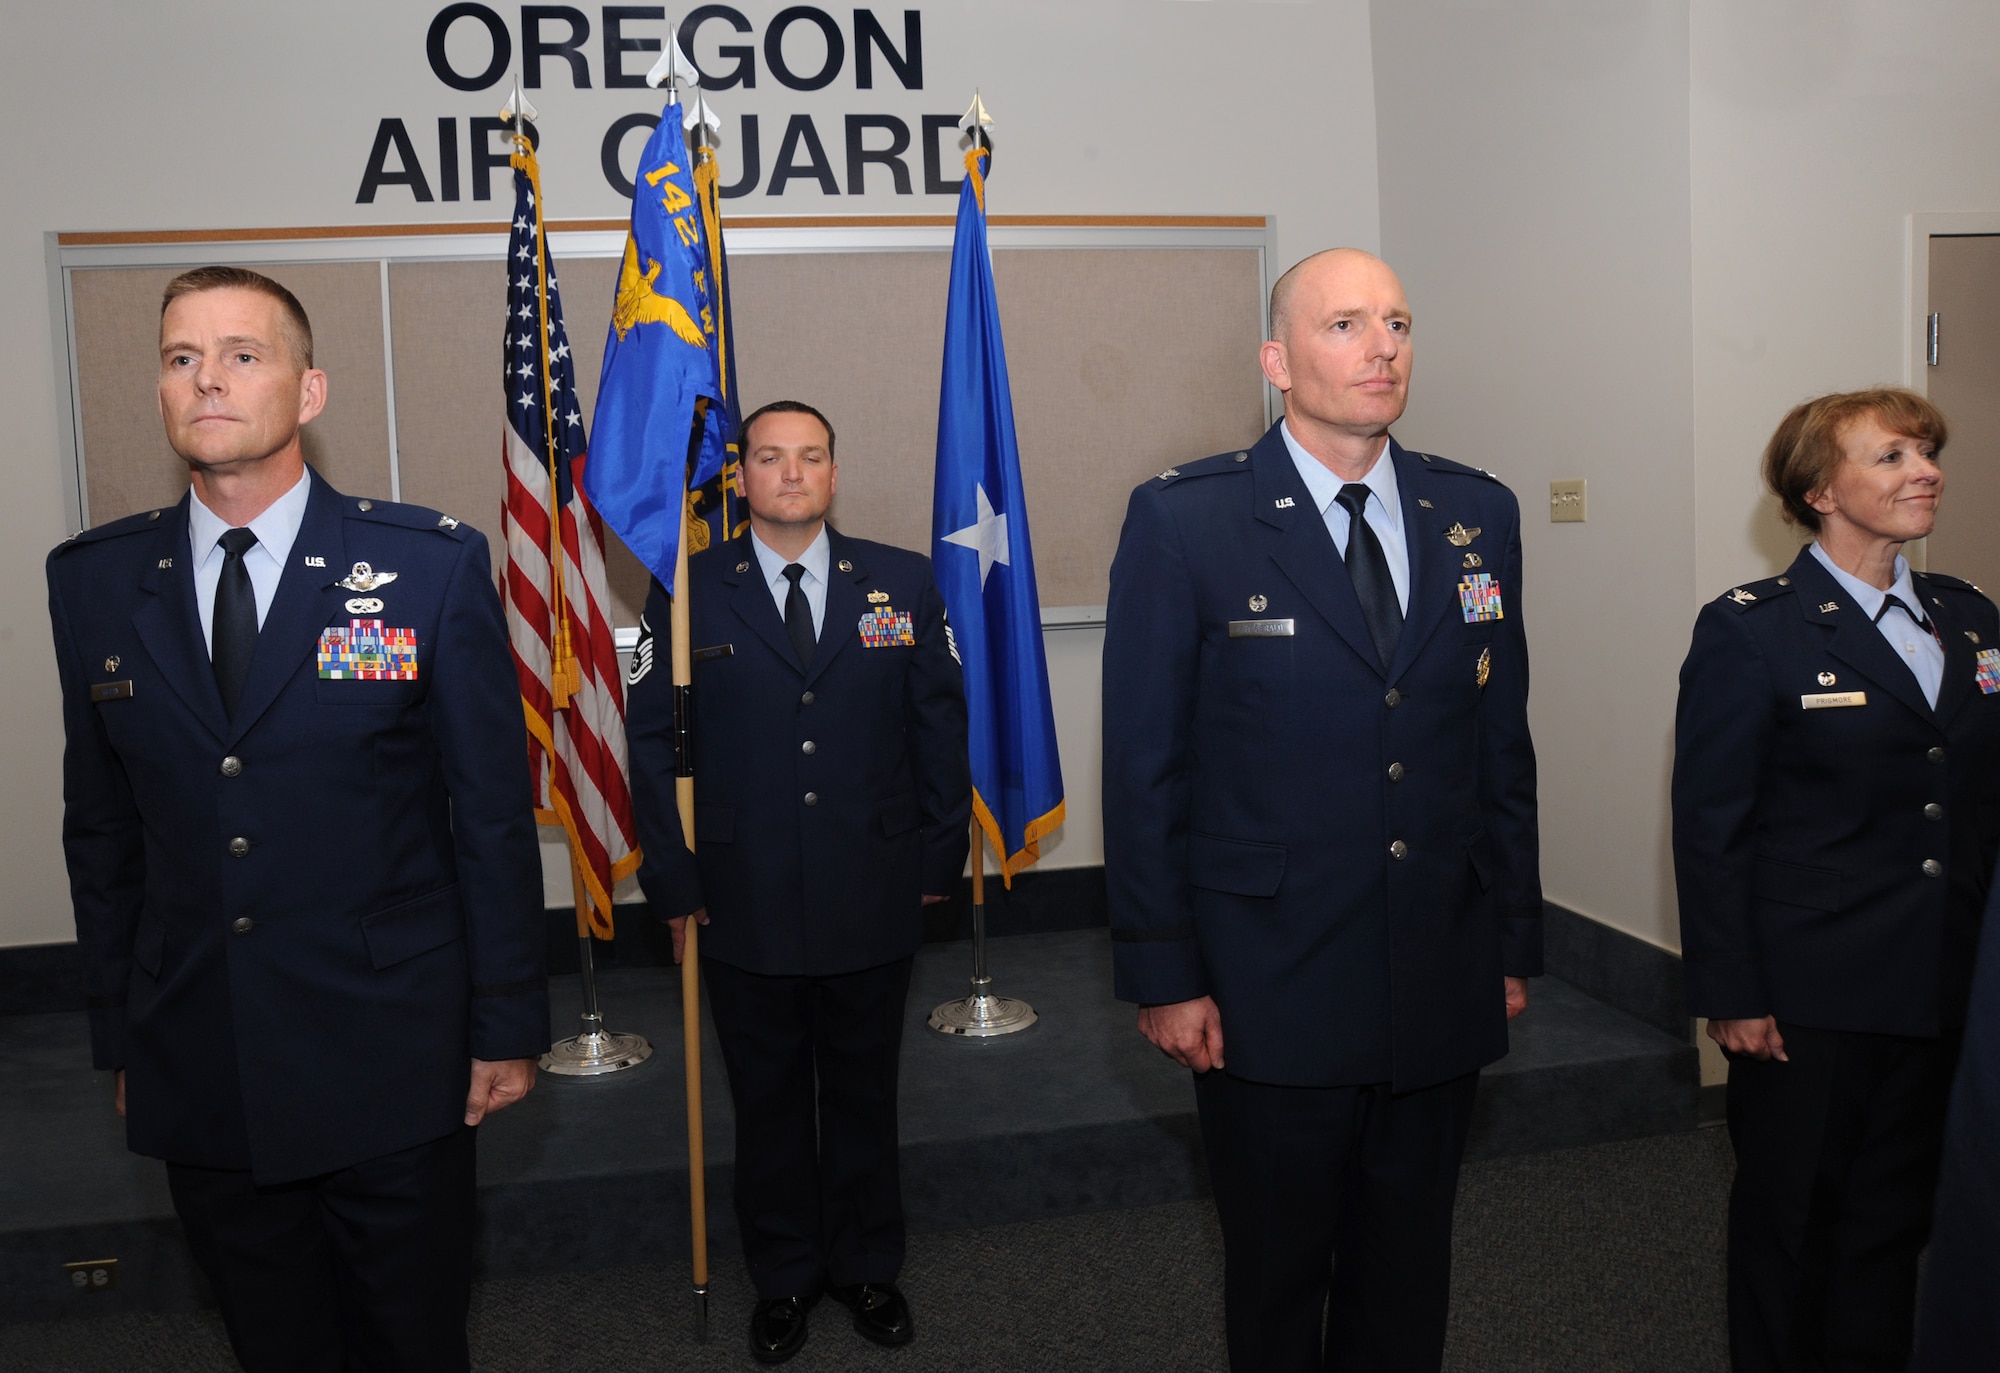 Col. Rick Wedan, 142nd Fighter Wing Commander, left, Master Sgt. Robert Vickery, center left, Col. Paul Fitzgerald, center right, and Col. Donna Prigmore, right, await the exchange of colors during the Mission Support Group Change of Command Ceremony, Portland Air National Guard Base, Ore., Aug. 3, 2014. (U.S. Air National Guard photo by Tech. Sgt. John Hughel, 142nd Fighter Wing Public Affairs/Released)